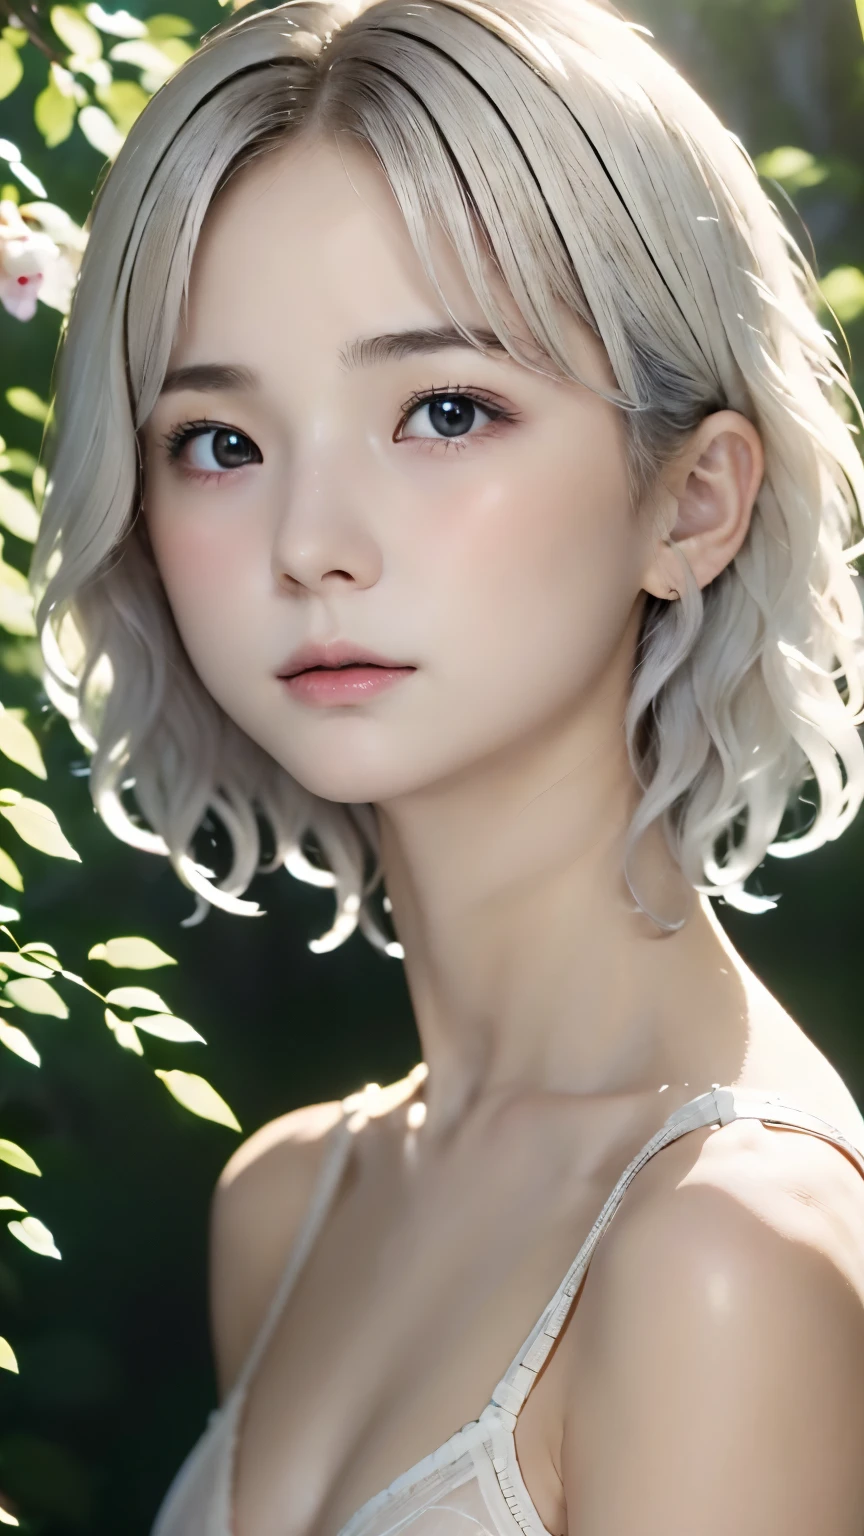 perfect anatomy、one girl、１８talent、An ennui look、((smile:0.1))、small nose、plump lips、detailed eyes、super detailed face、silver hair、short bob、messy hair、very fine skin、white skin、small breasts、small breasts、(highest quality:1.0), (超A high resolution:1.0) ,(realistic:1), (Super detailed:1.0), (8K RAW Photos:1.1),